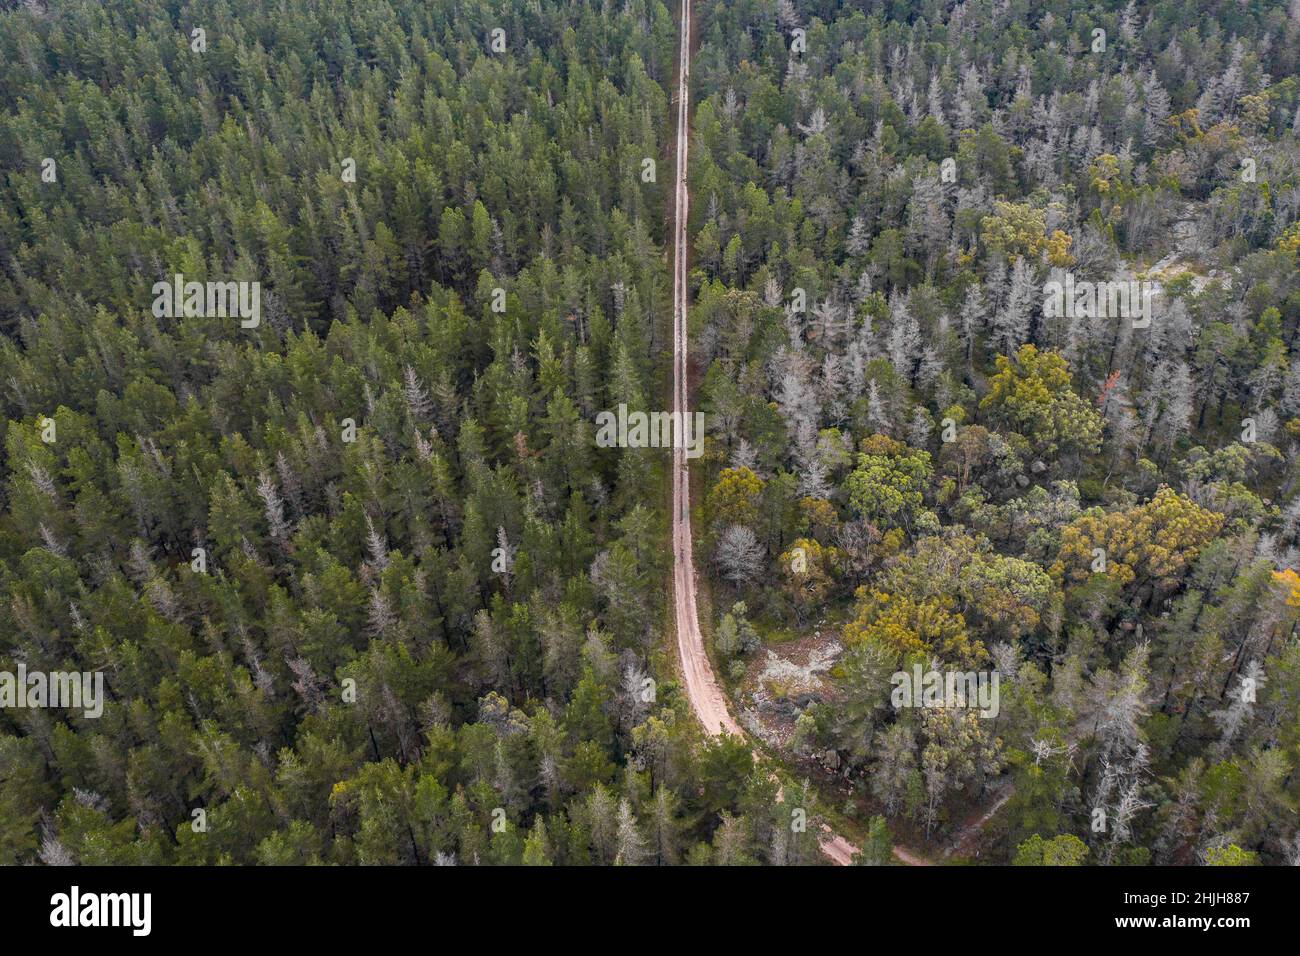 Beautiful aerial view of a country road in a forest. Stock Photo